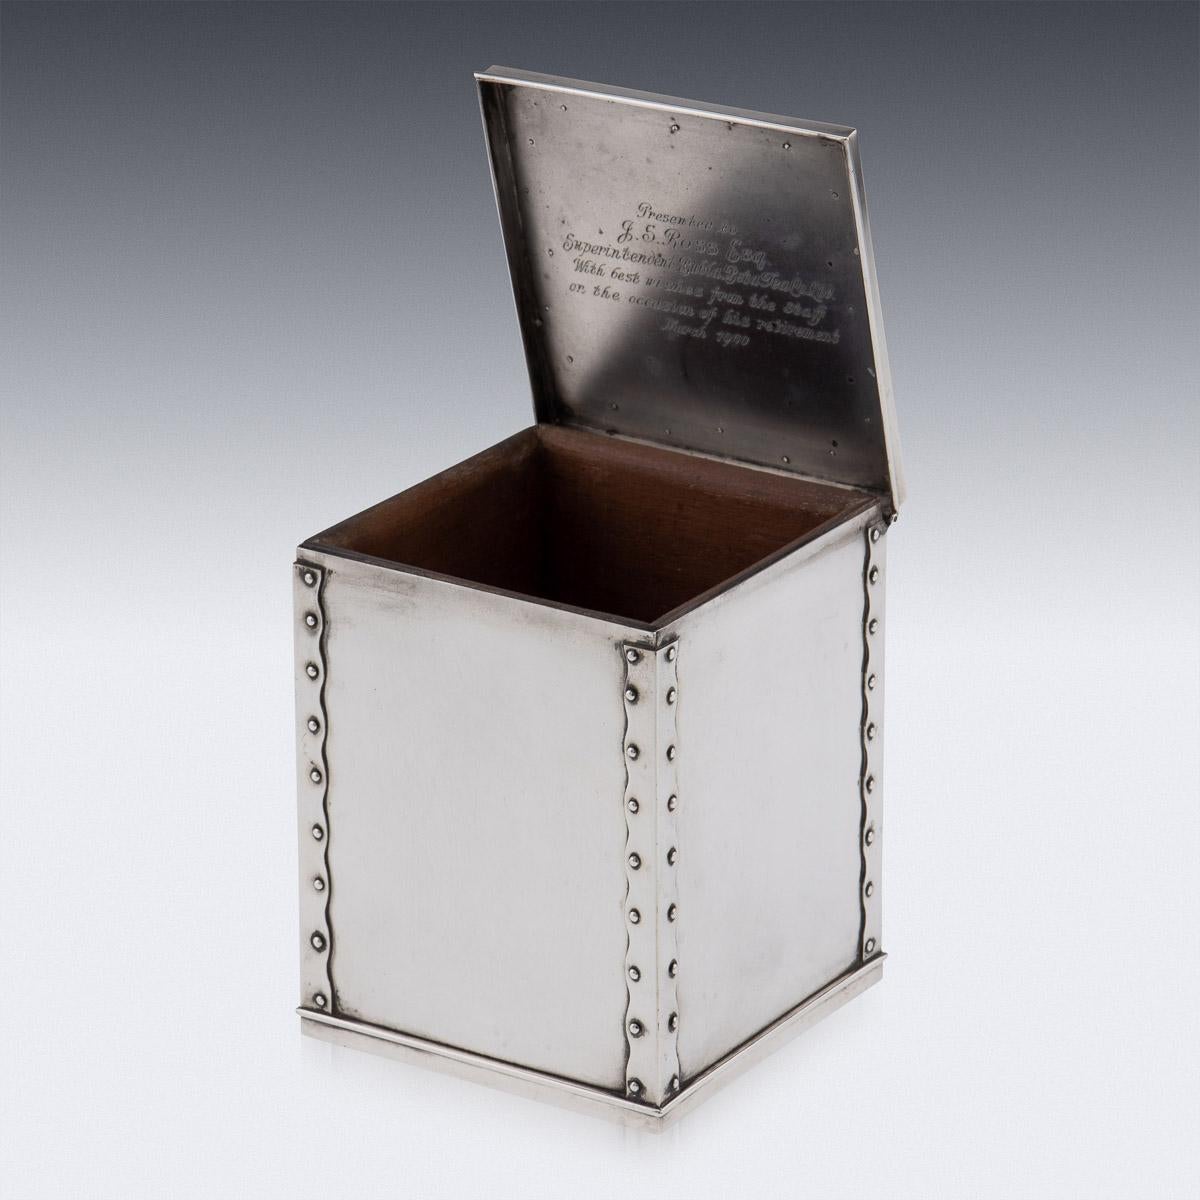 19th Century Indian colonial silver tea caddy shaped as a tea chest. Of square form, imitating a tea chest, with metal corner brackets and rivets, with a hinged lid and wood lined interior. Inside lid inscribed 'Presented to J.S Ross Esq,